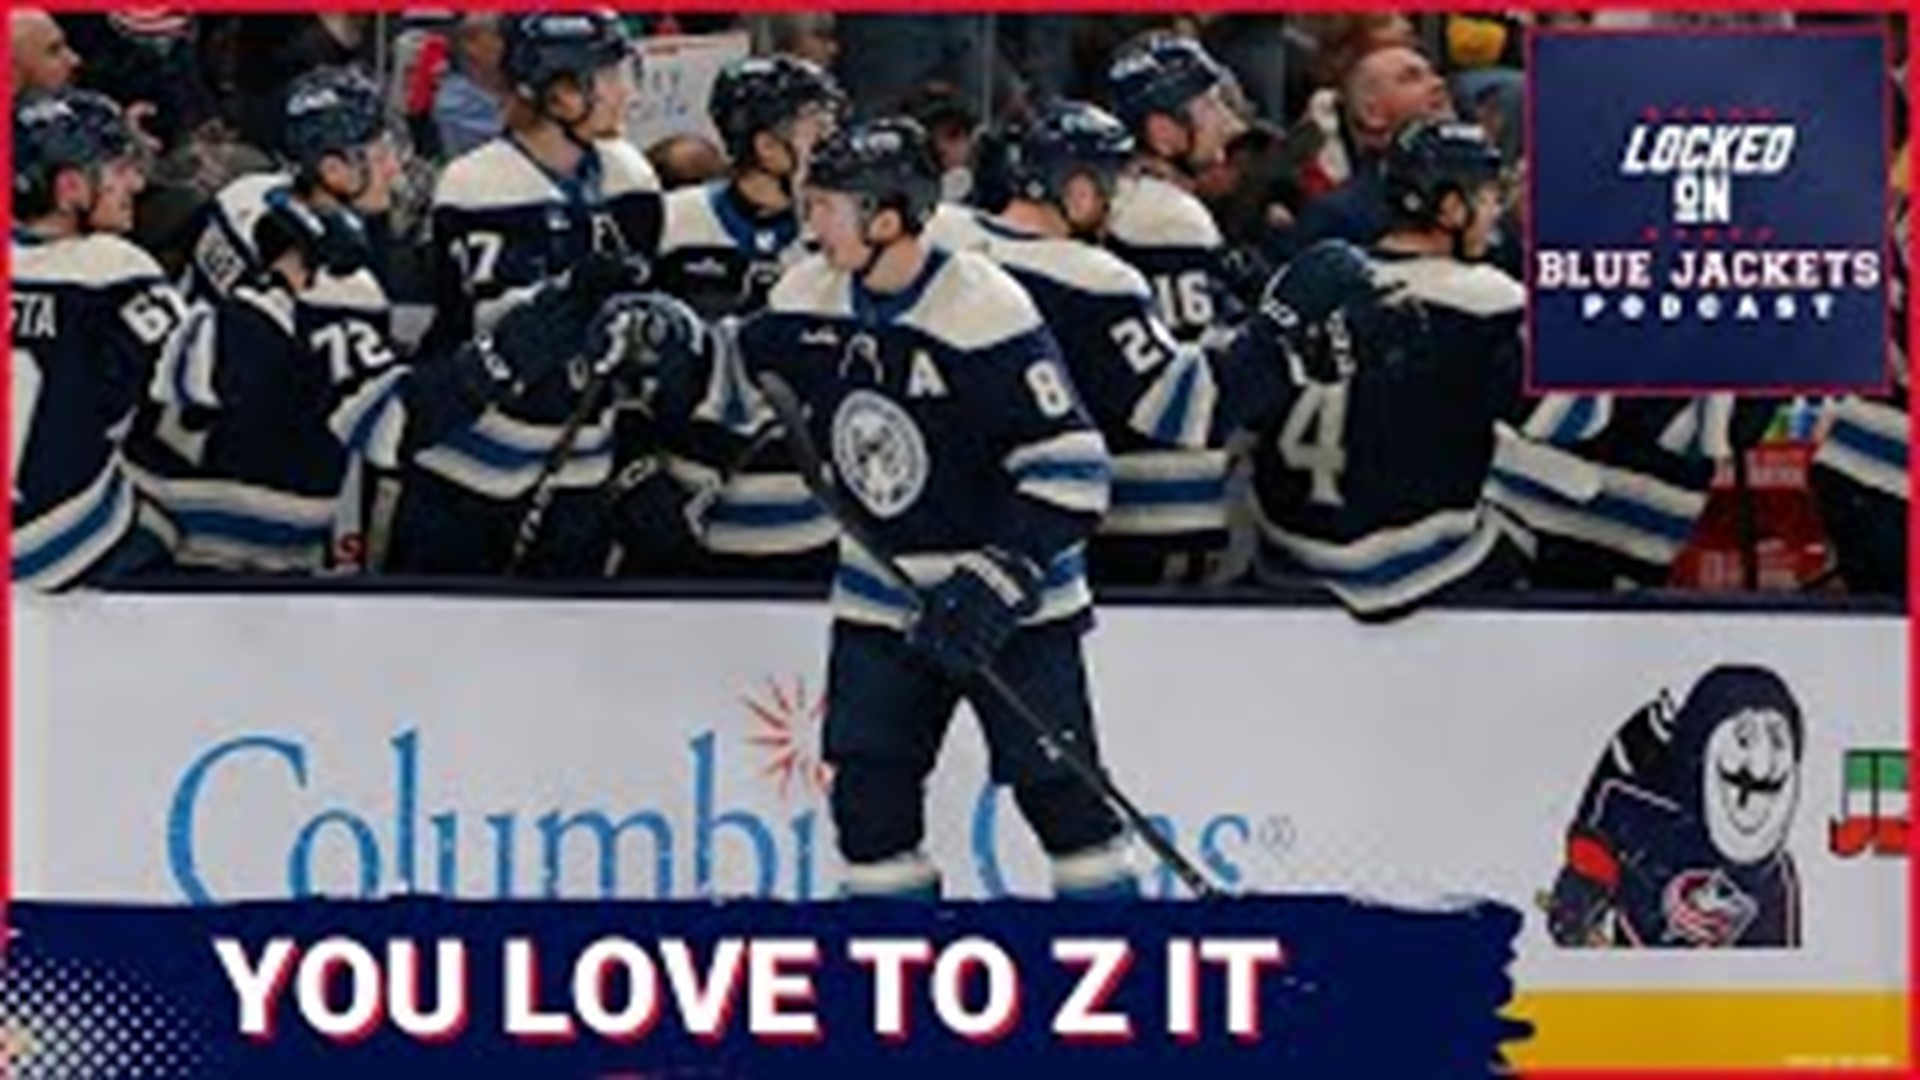 The losing streak is over!!! The Blue Jackets beat the Penguins to avoid the season sweep, with a great performance from Elvis Merzlikins in goal, and Zach Werenski.